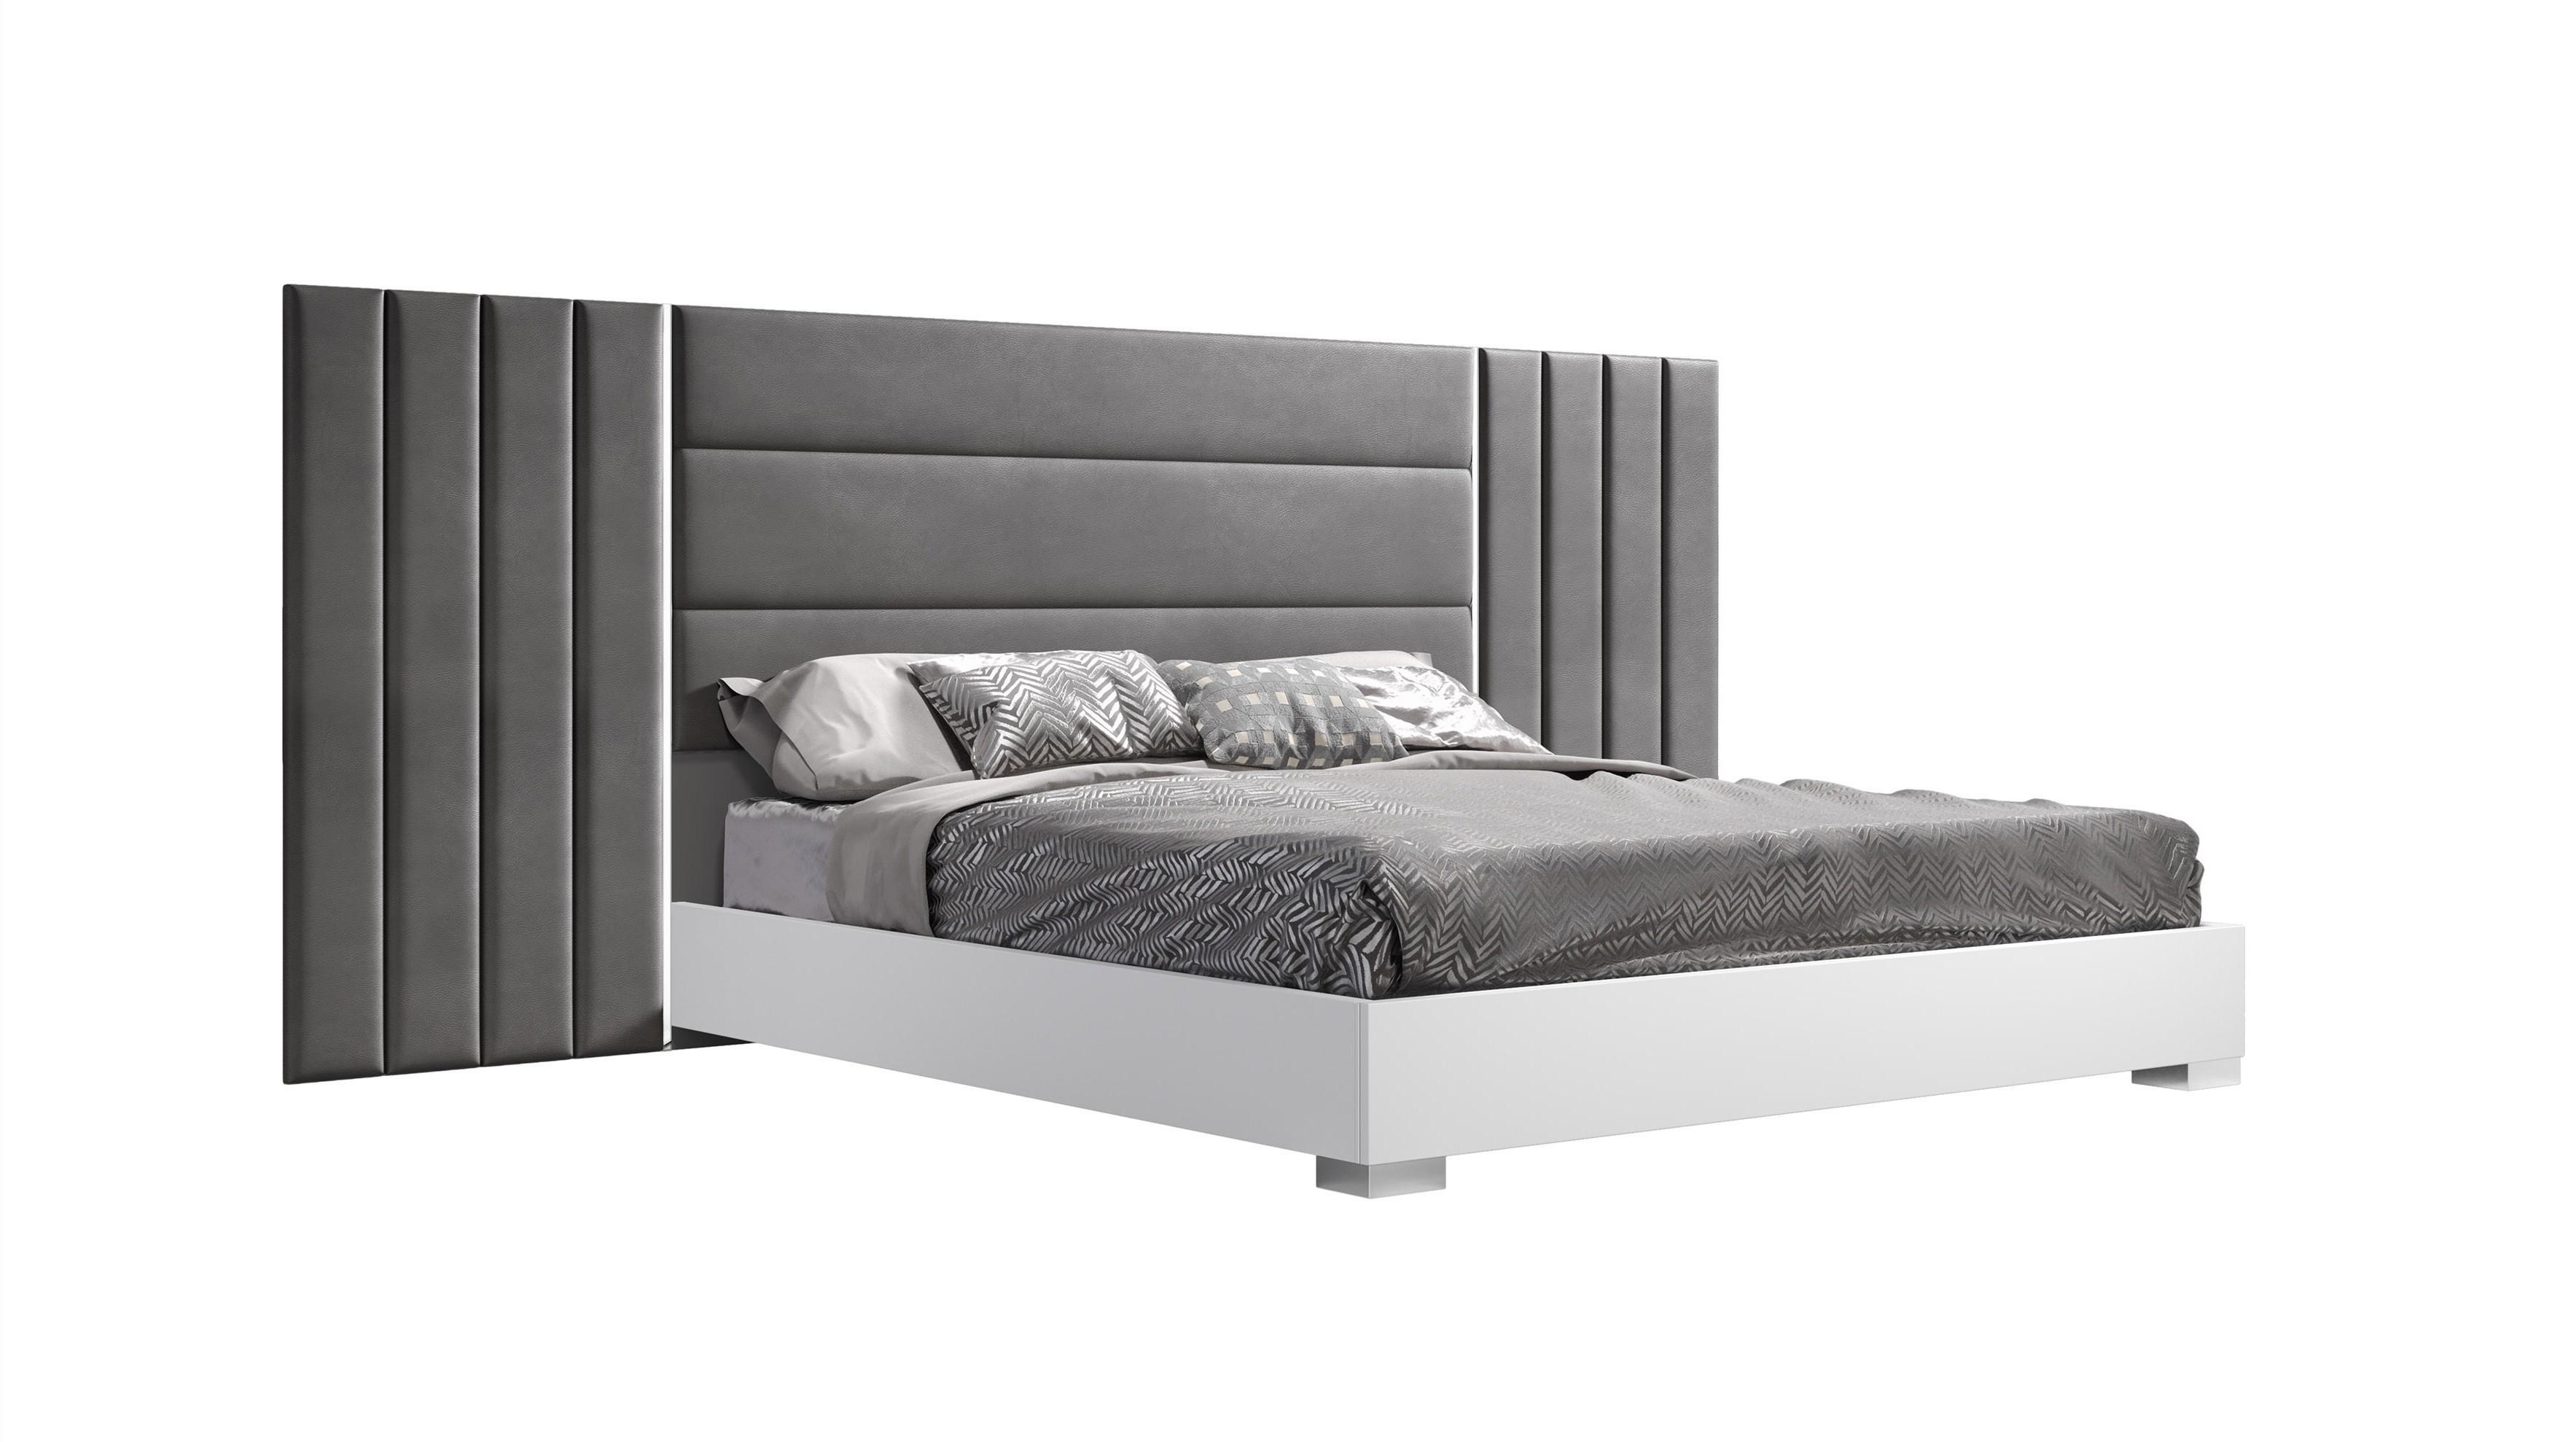 

    
Contemporary Gray and White Composite Wood Queen Bed Set 3PCS J&M Furniture Nina 18332-Q-3PCS
